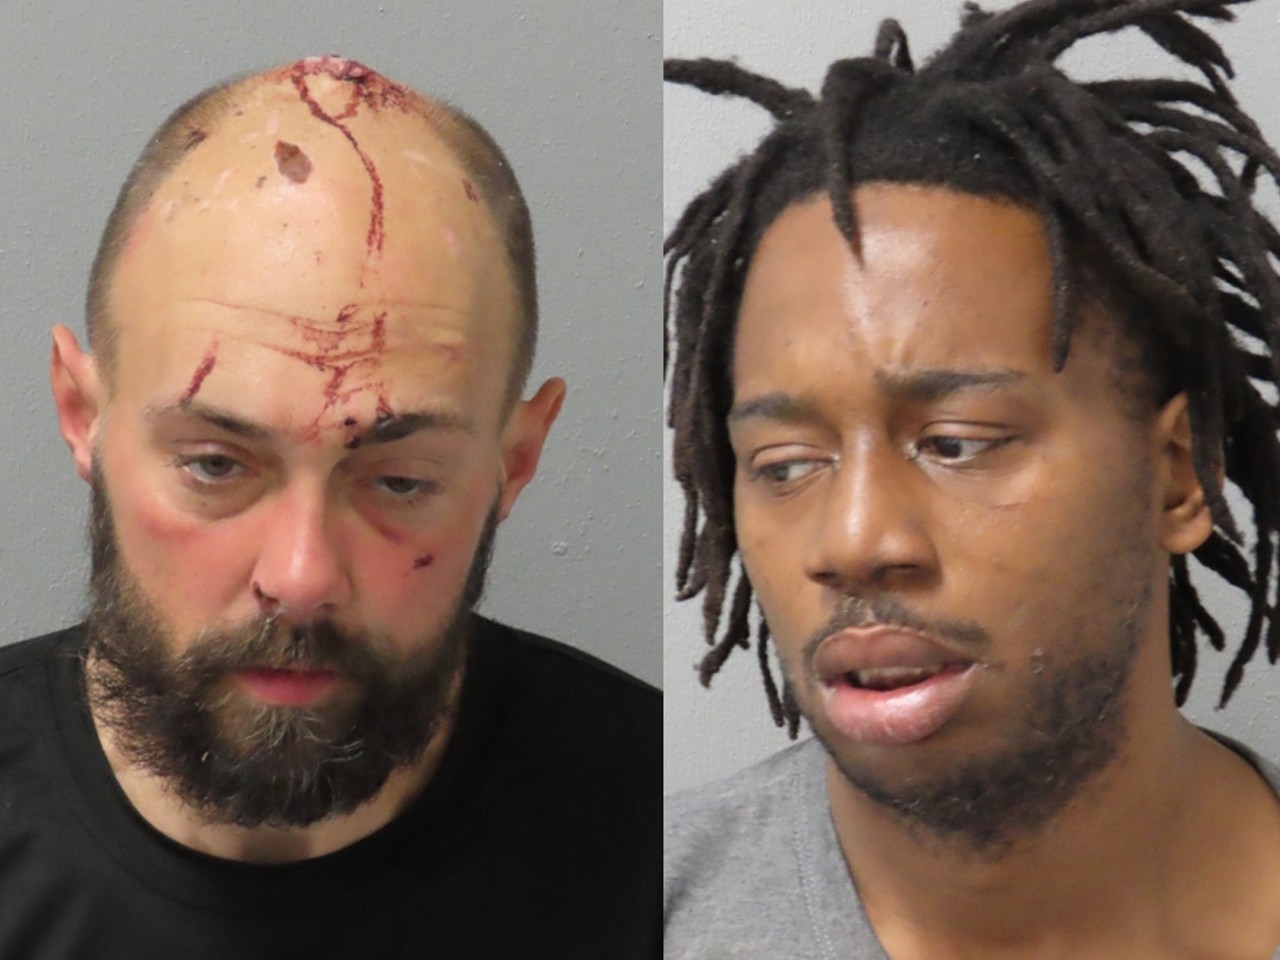 Two men tried to rob the flying saucer Starbucks. But this is St. Louis, and we don&rsquo;t take that kind of shit here, especially from a boy from Potosi. They got beat up instead &mdash; and one was detained by customers and staff until the cops arrived.&nbsp;
Read the full story here.